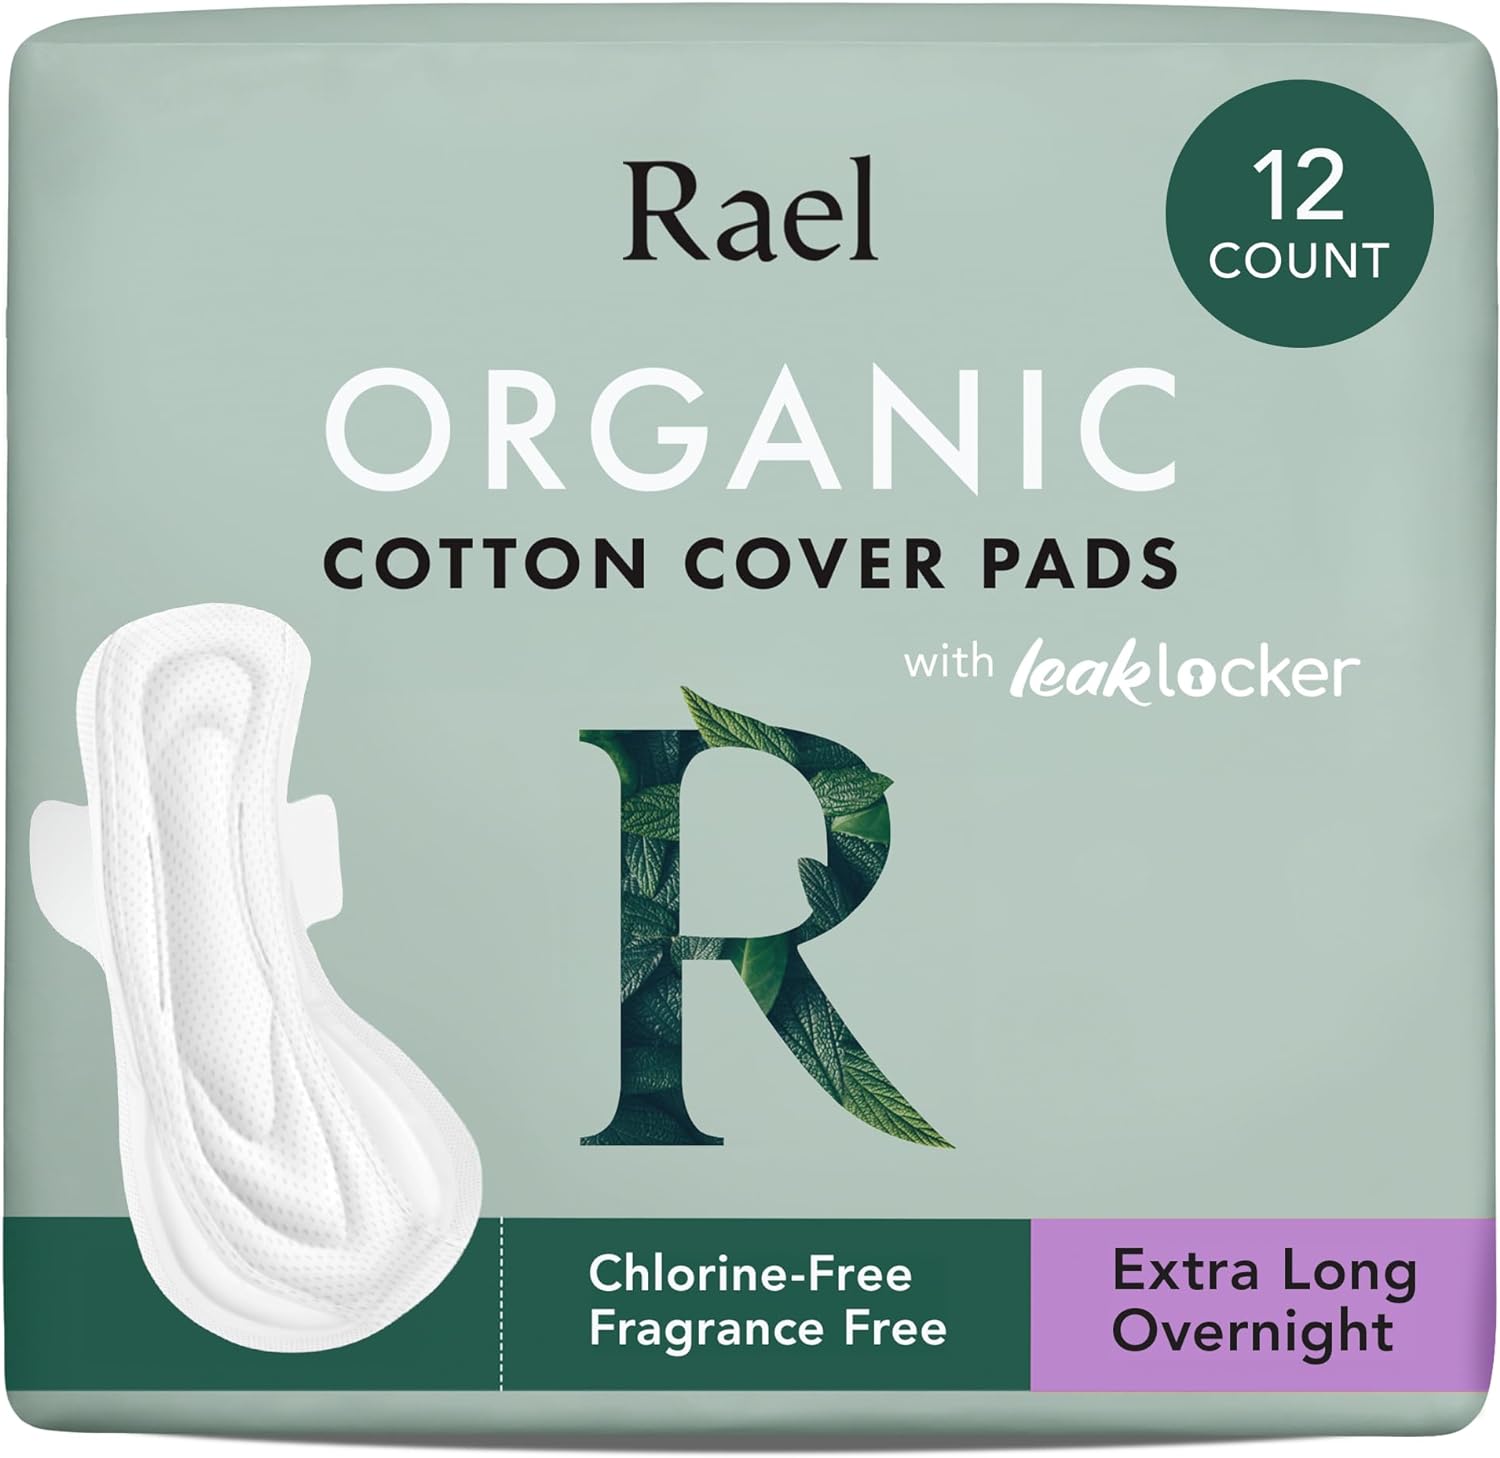 Rael Pads for Women, Organic Cotton Cover - Period Pads with Wings, Feminine Care, Sanitary Napkins, Heavy Absorbency, Unscented, Ultra Thin (Extra Long Overnight, 12 Count)